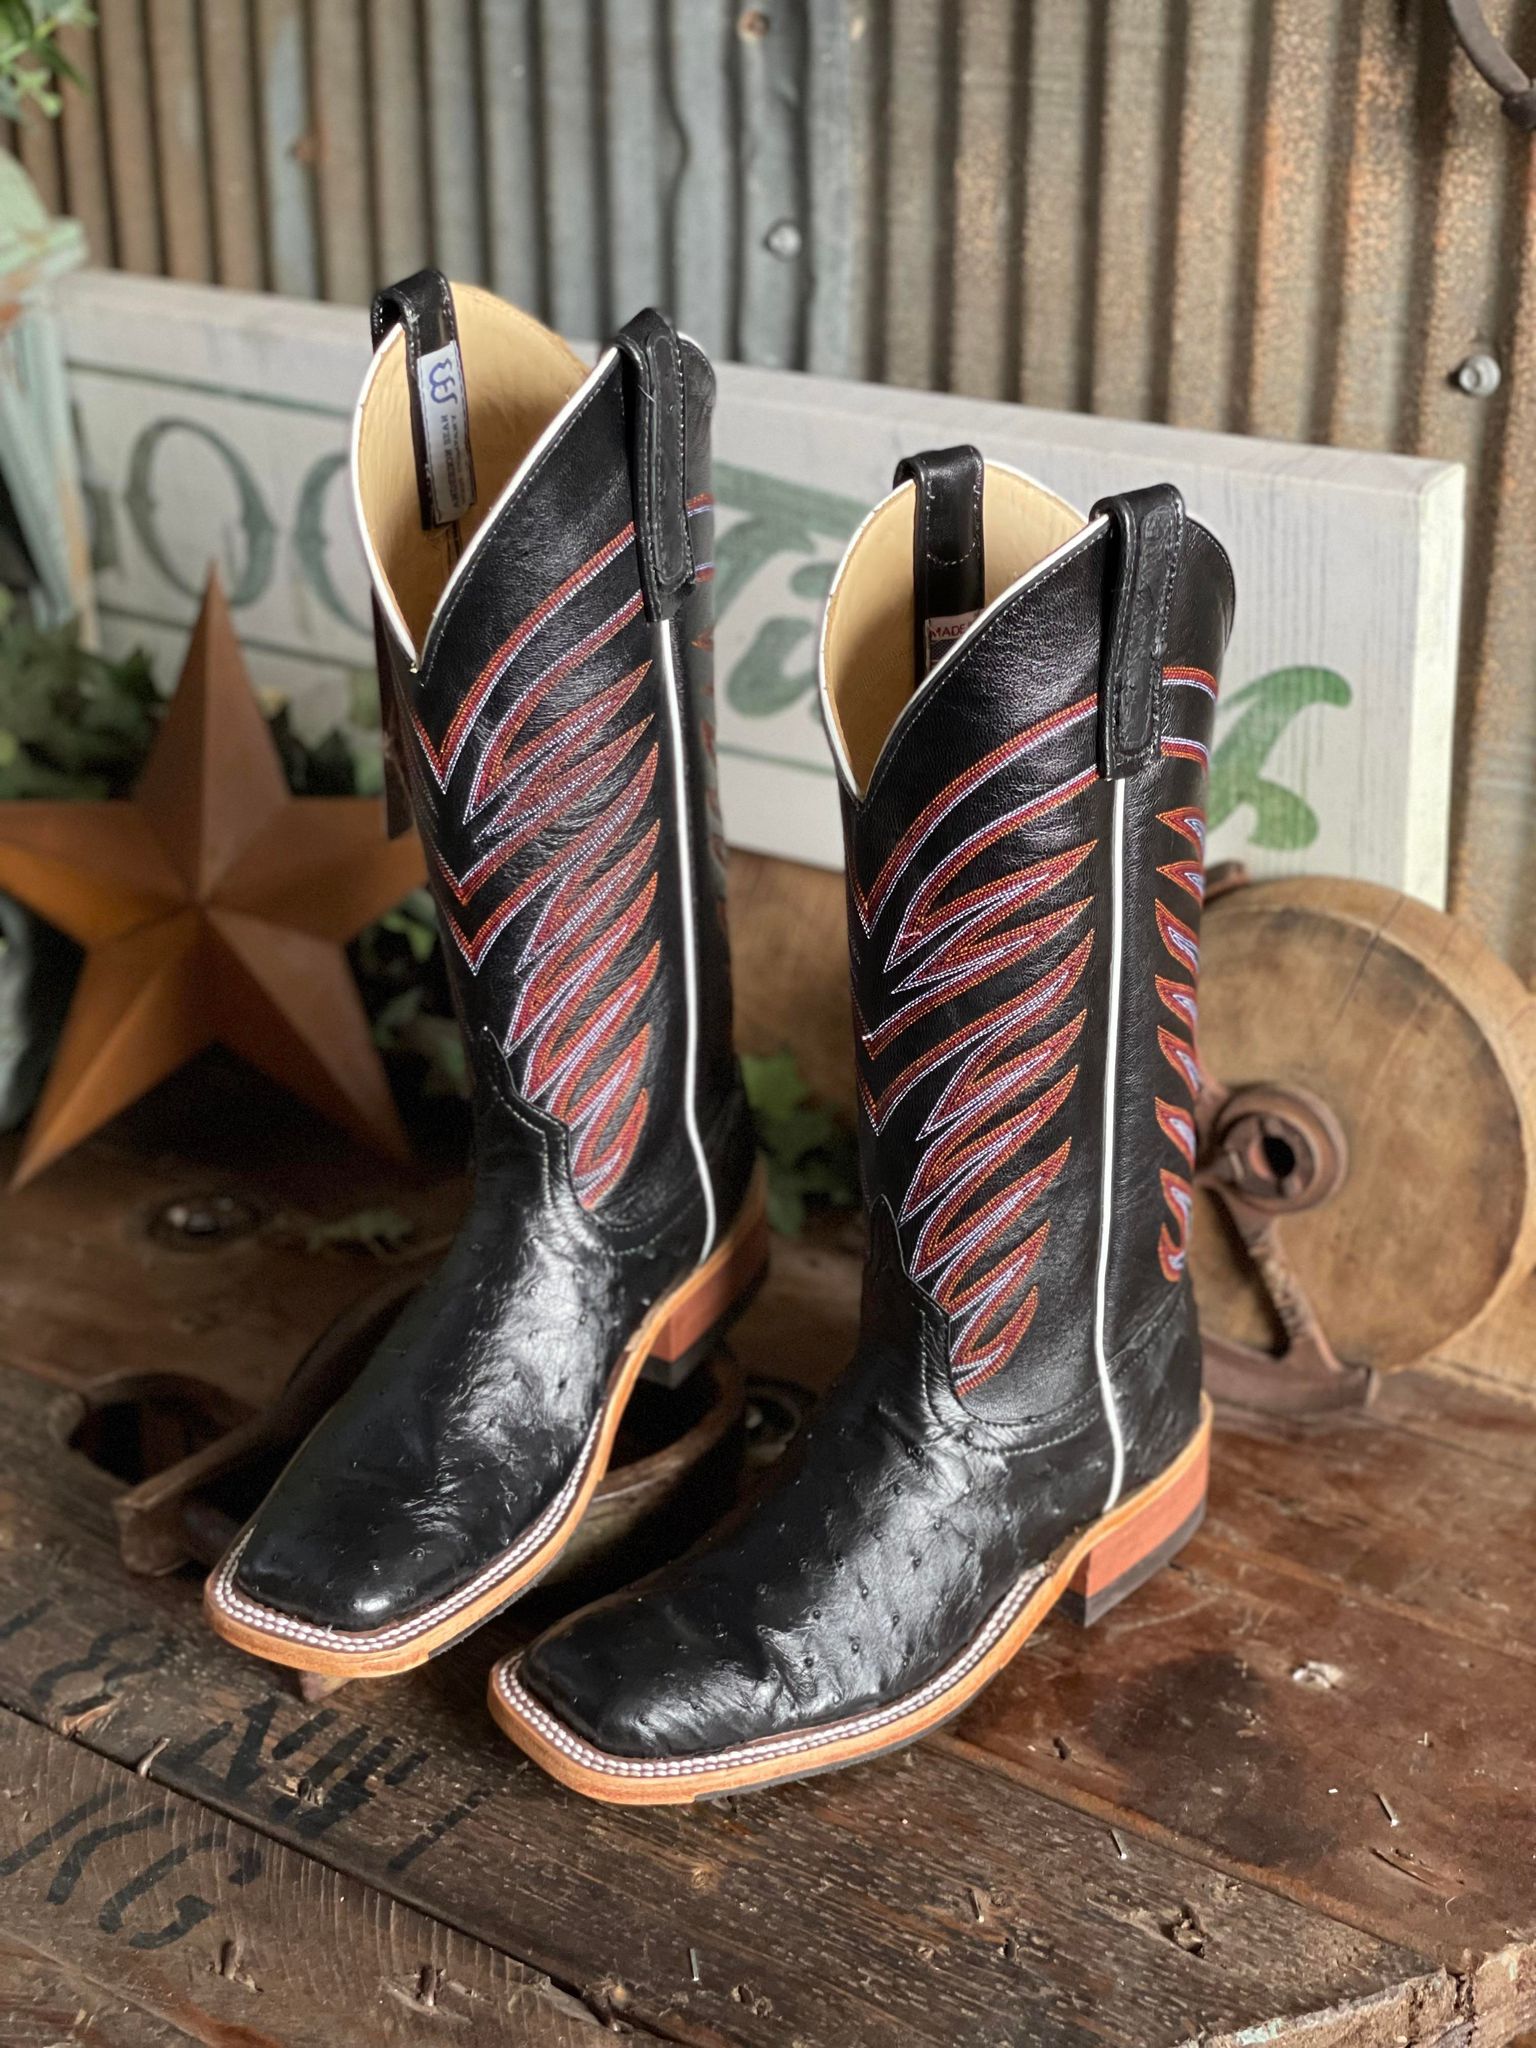 AB Women's Black Ostrich Full Quill-Women's Boots-Anderson Bean-Lucky J Boots & More, Women's, Men's, & Kids Western Store Located in Carthage, MO